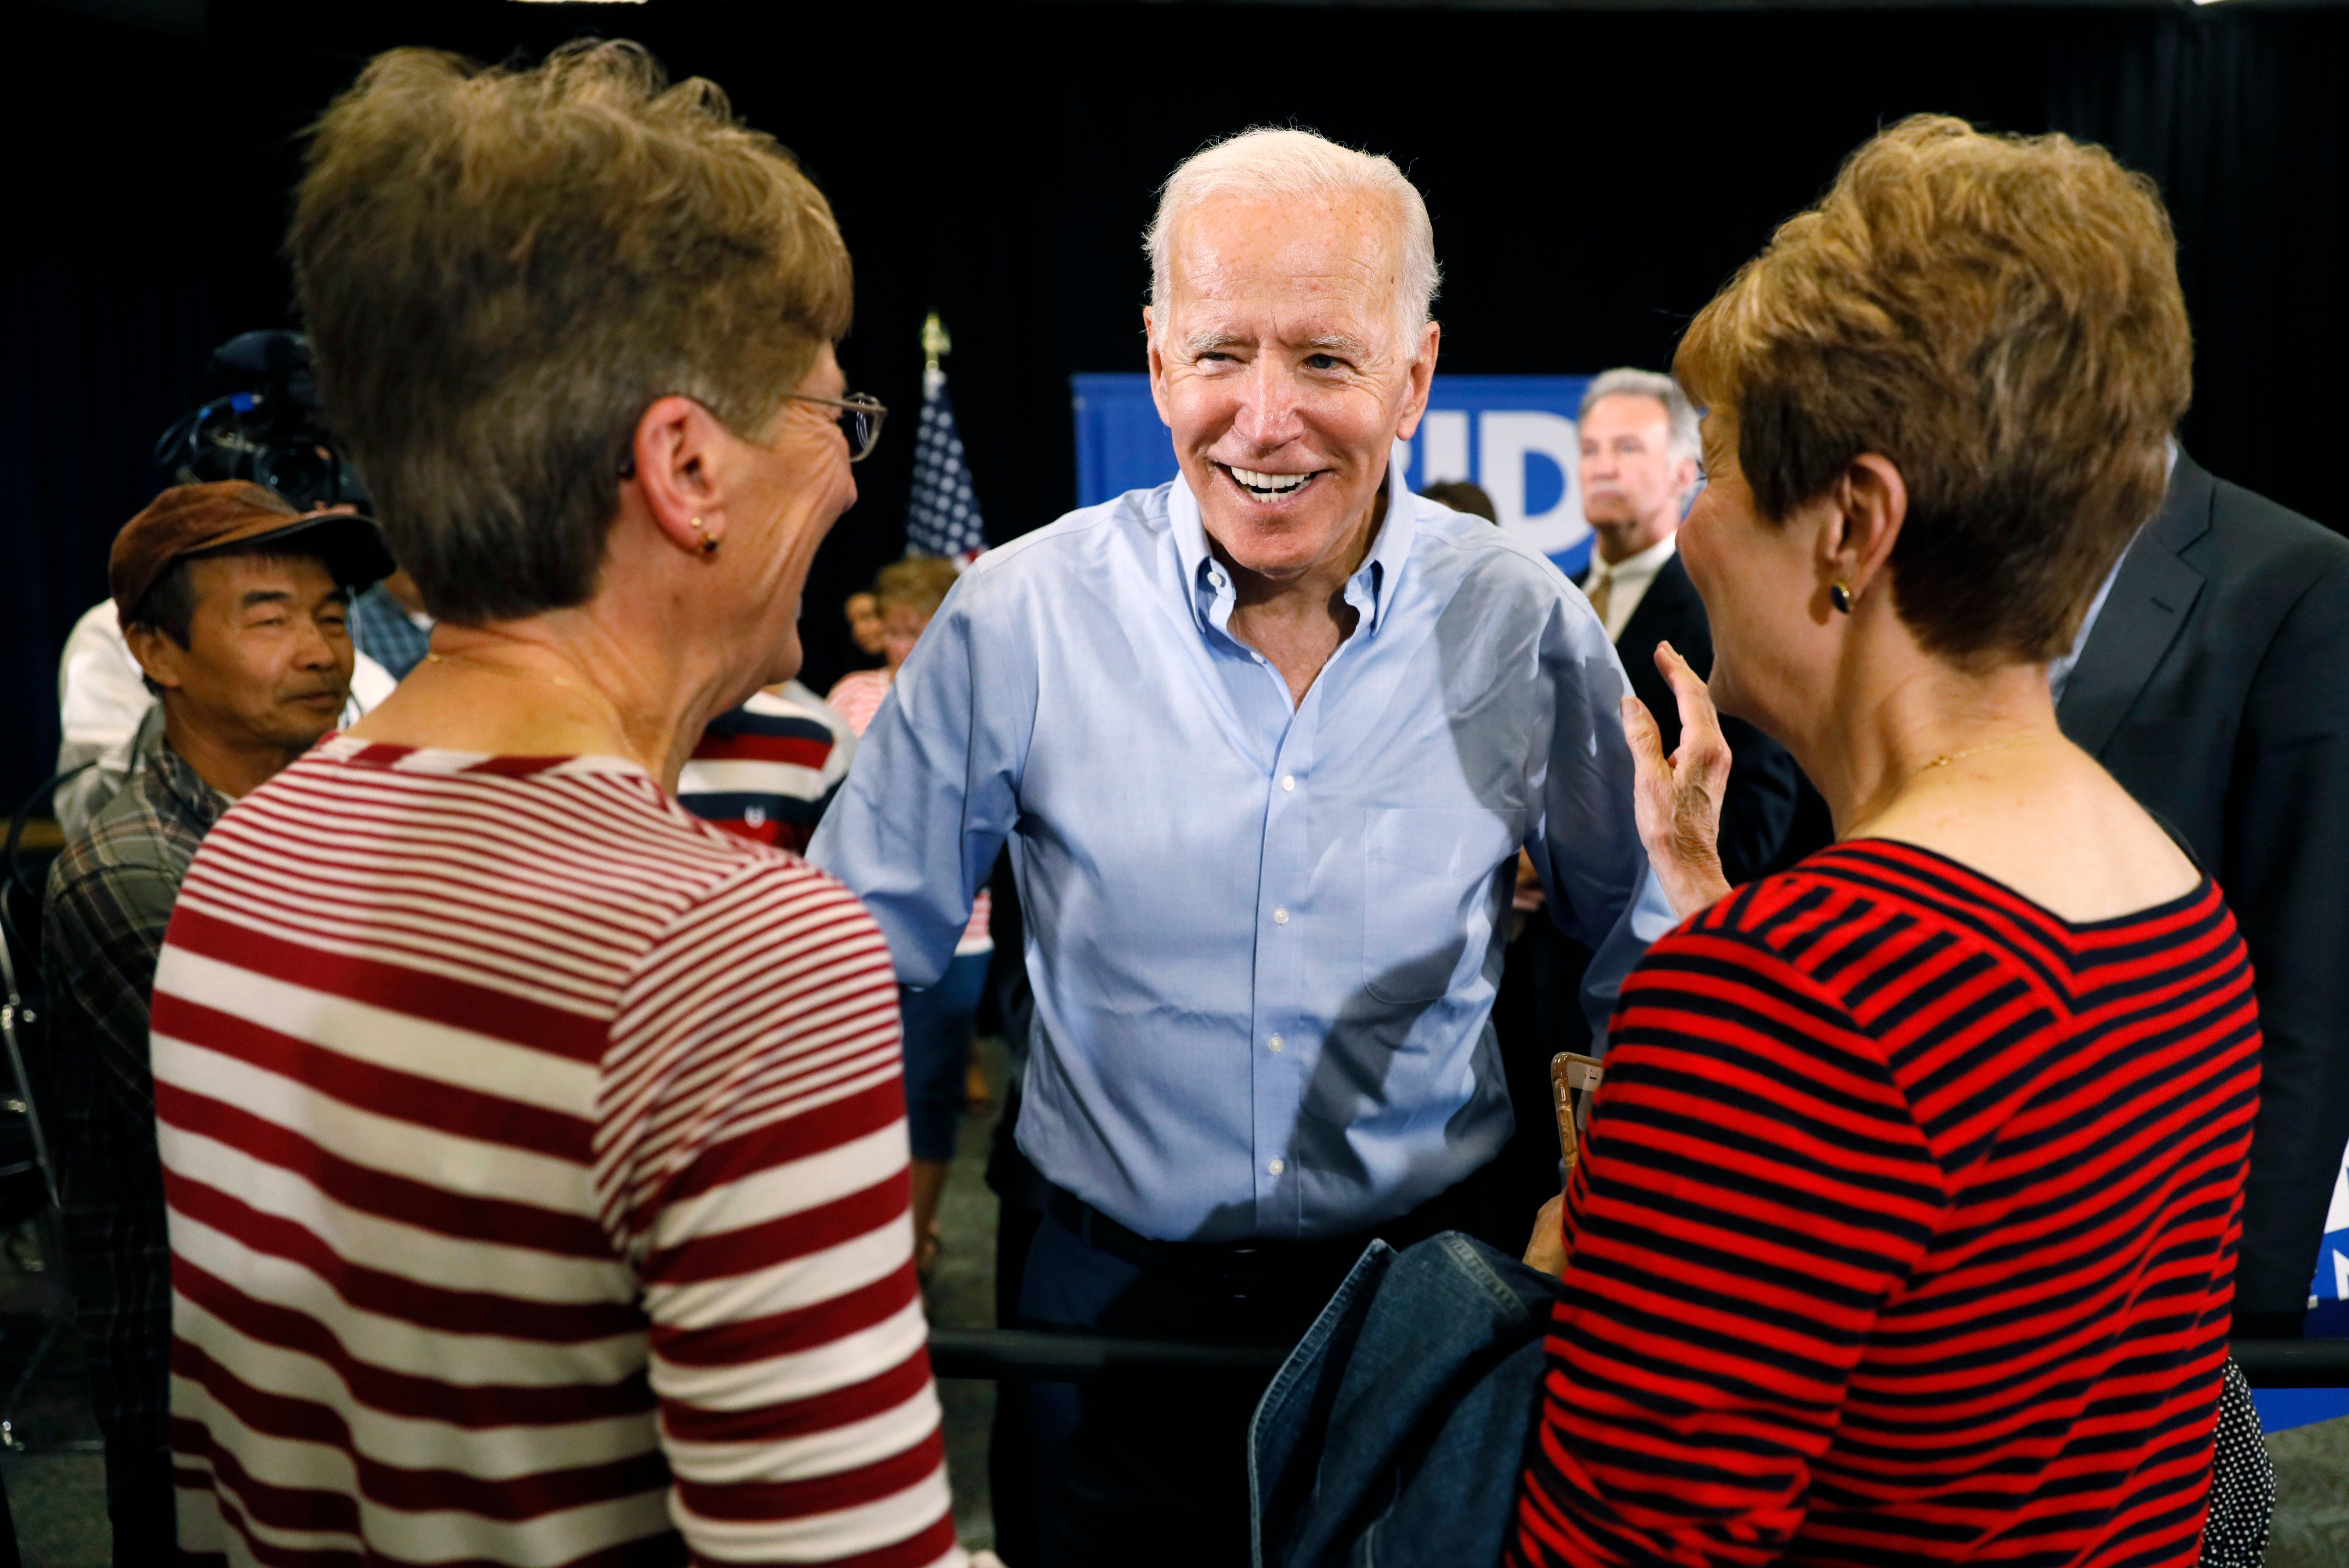 Democratic presidential candidate former Vice President Joe Biden greets audience members after speaking at Clinton Community College, June 12, 2019, in Clinton, Iowa.